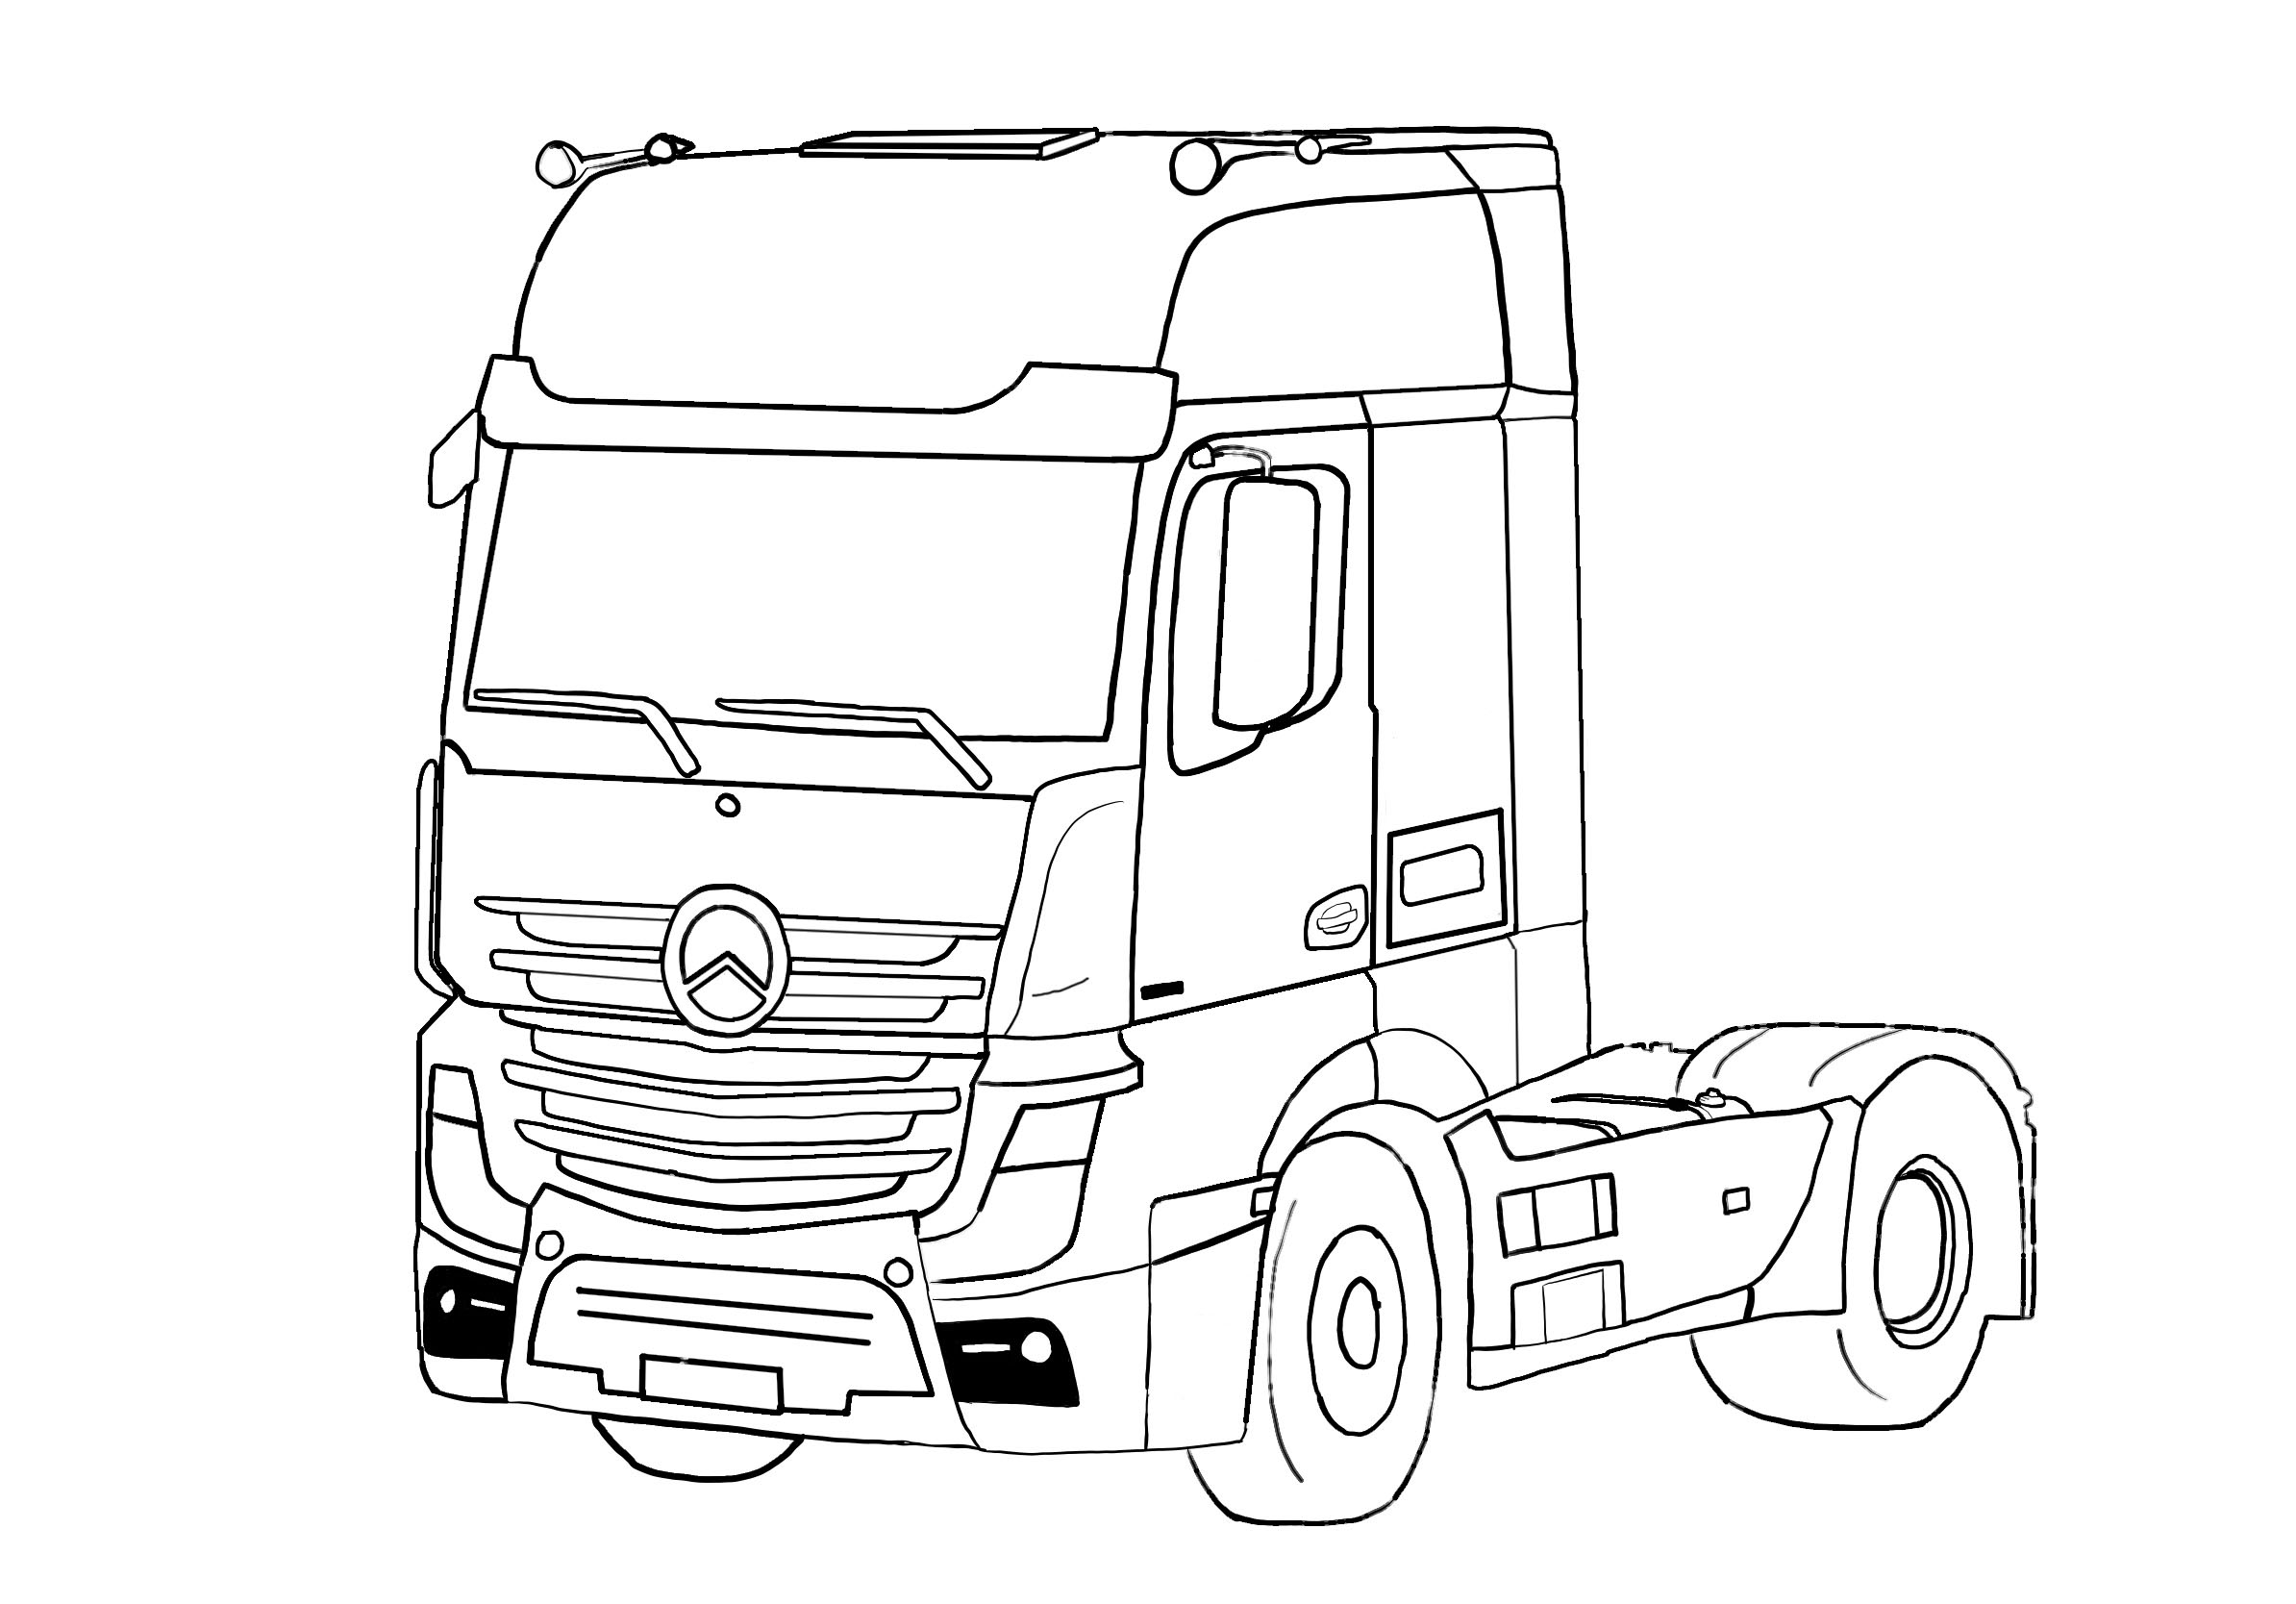 Image of Lorry